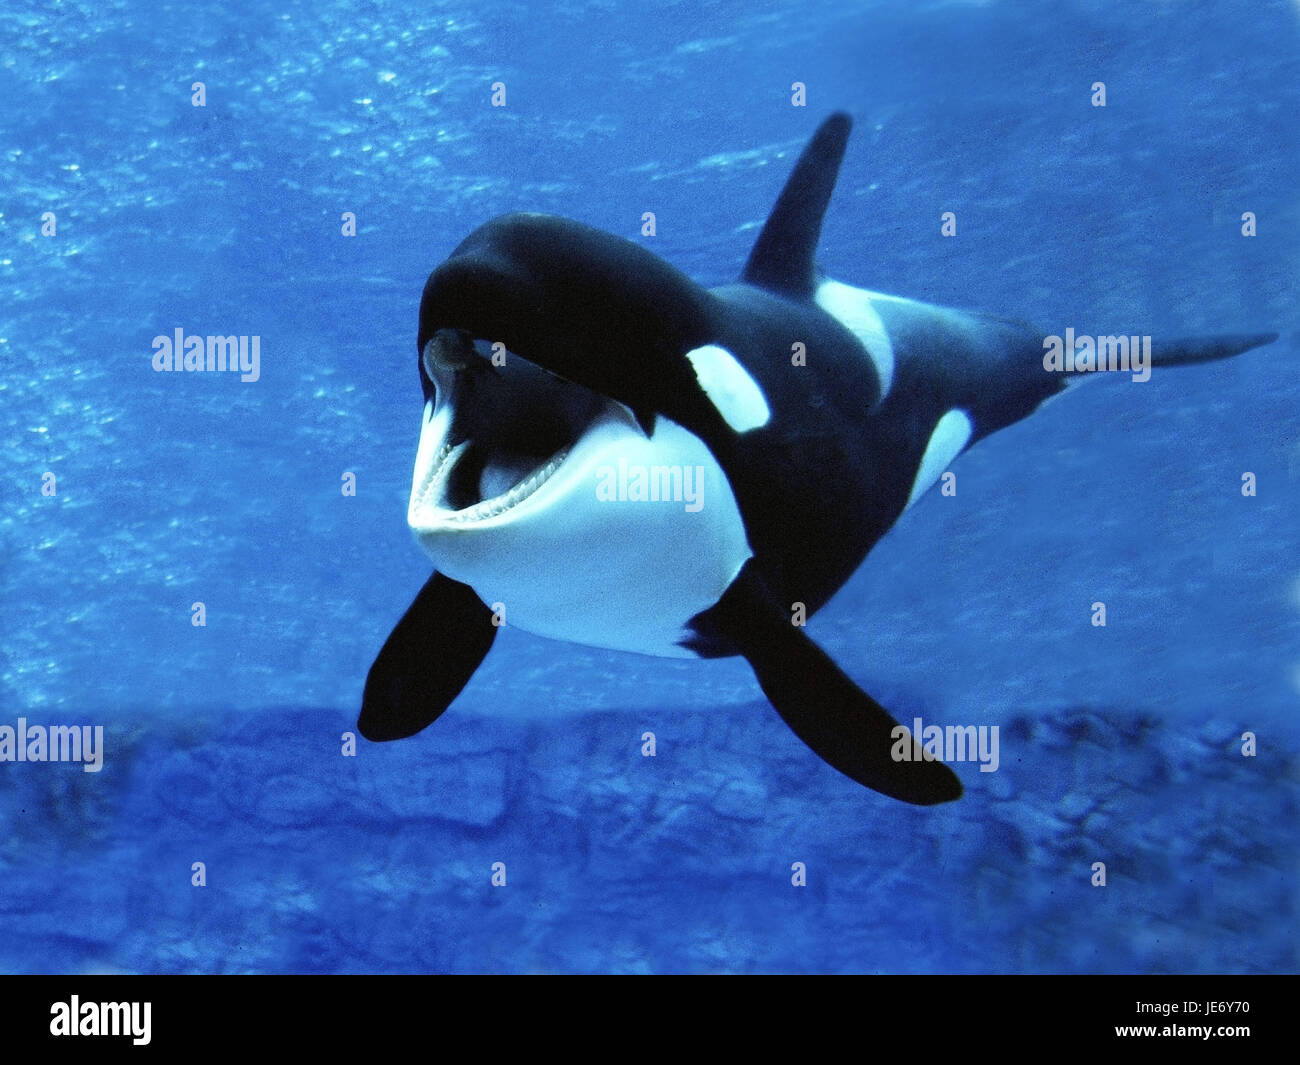 Big killer whale, Orcinus orca, adult animal, open mouth, Stock Photo